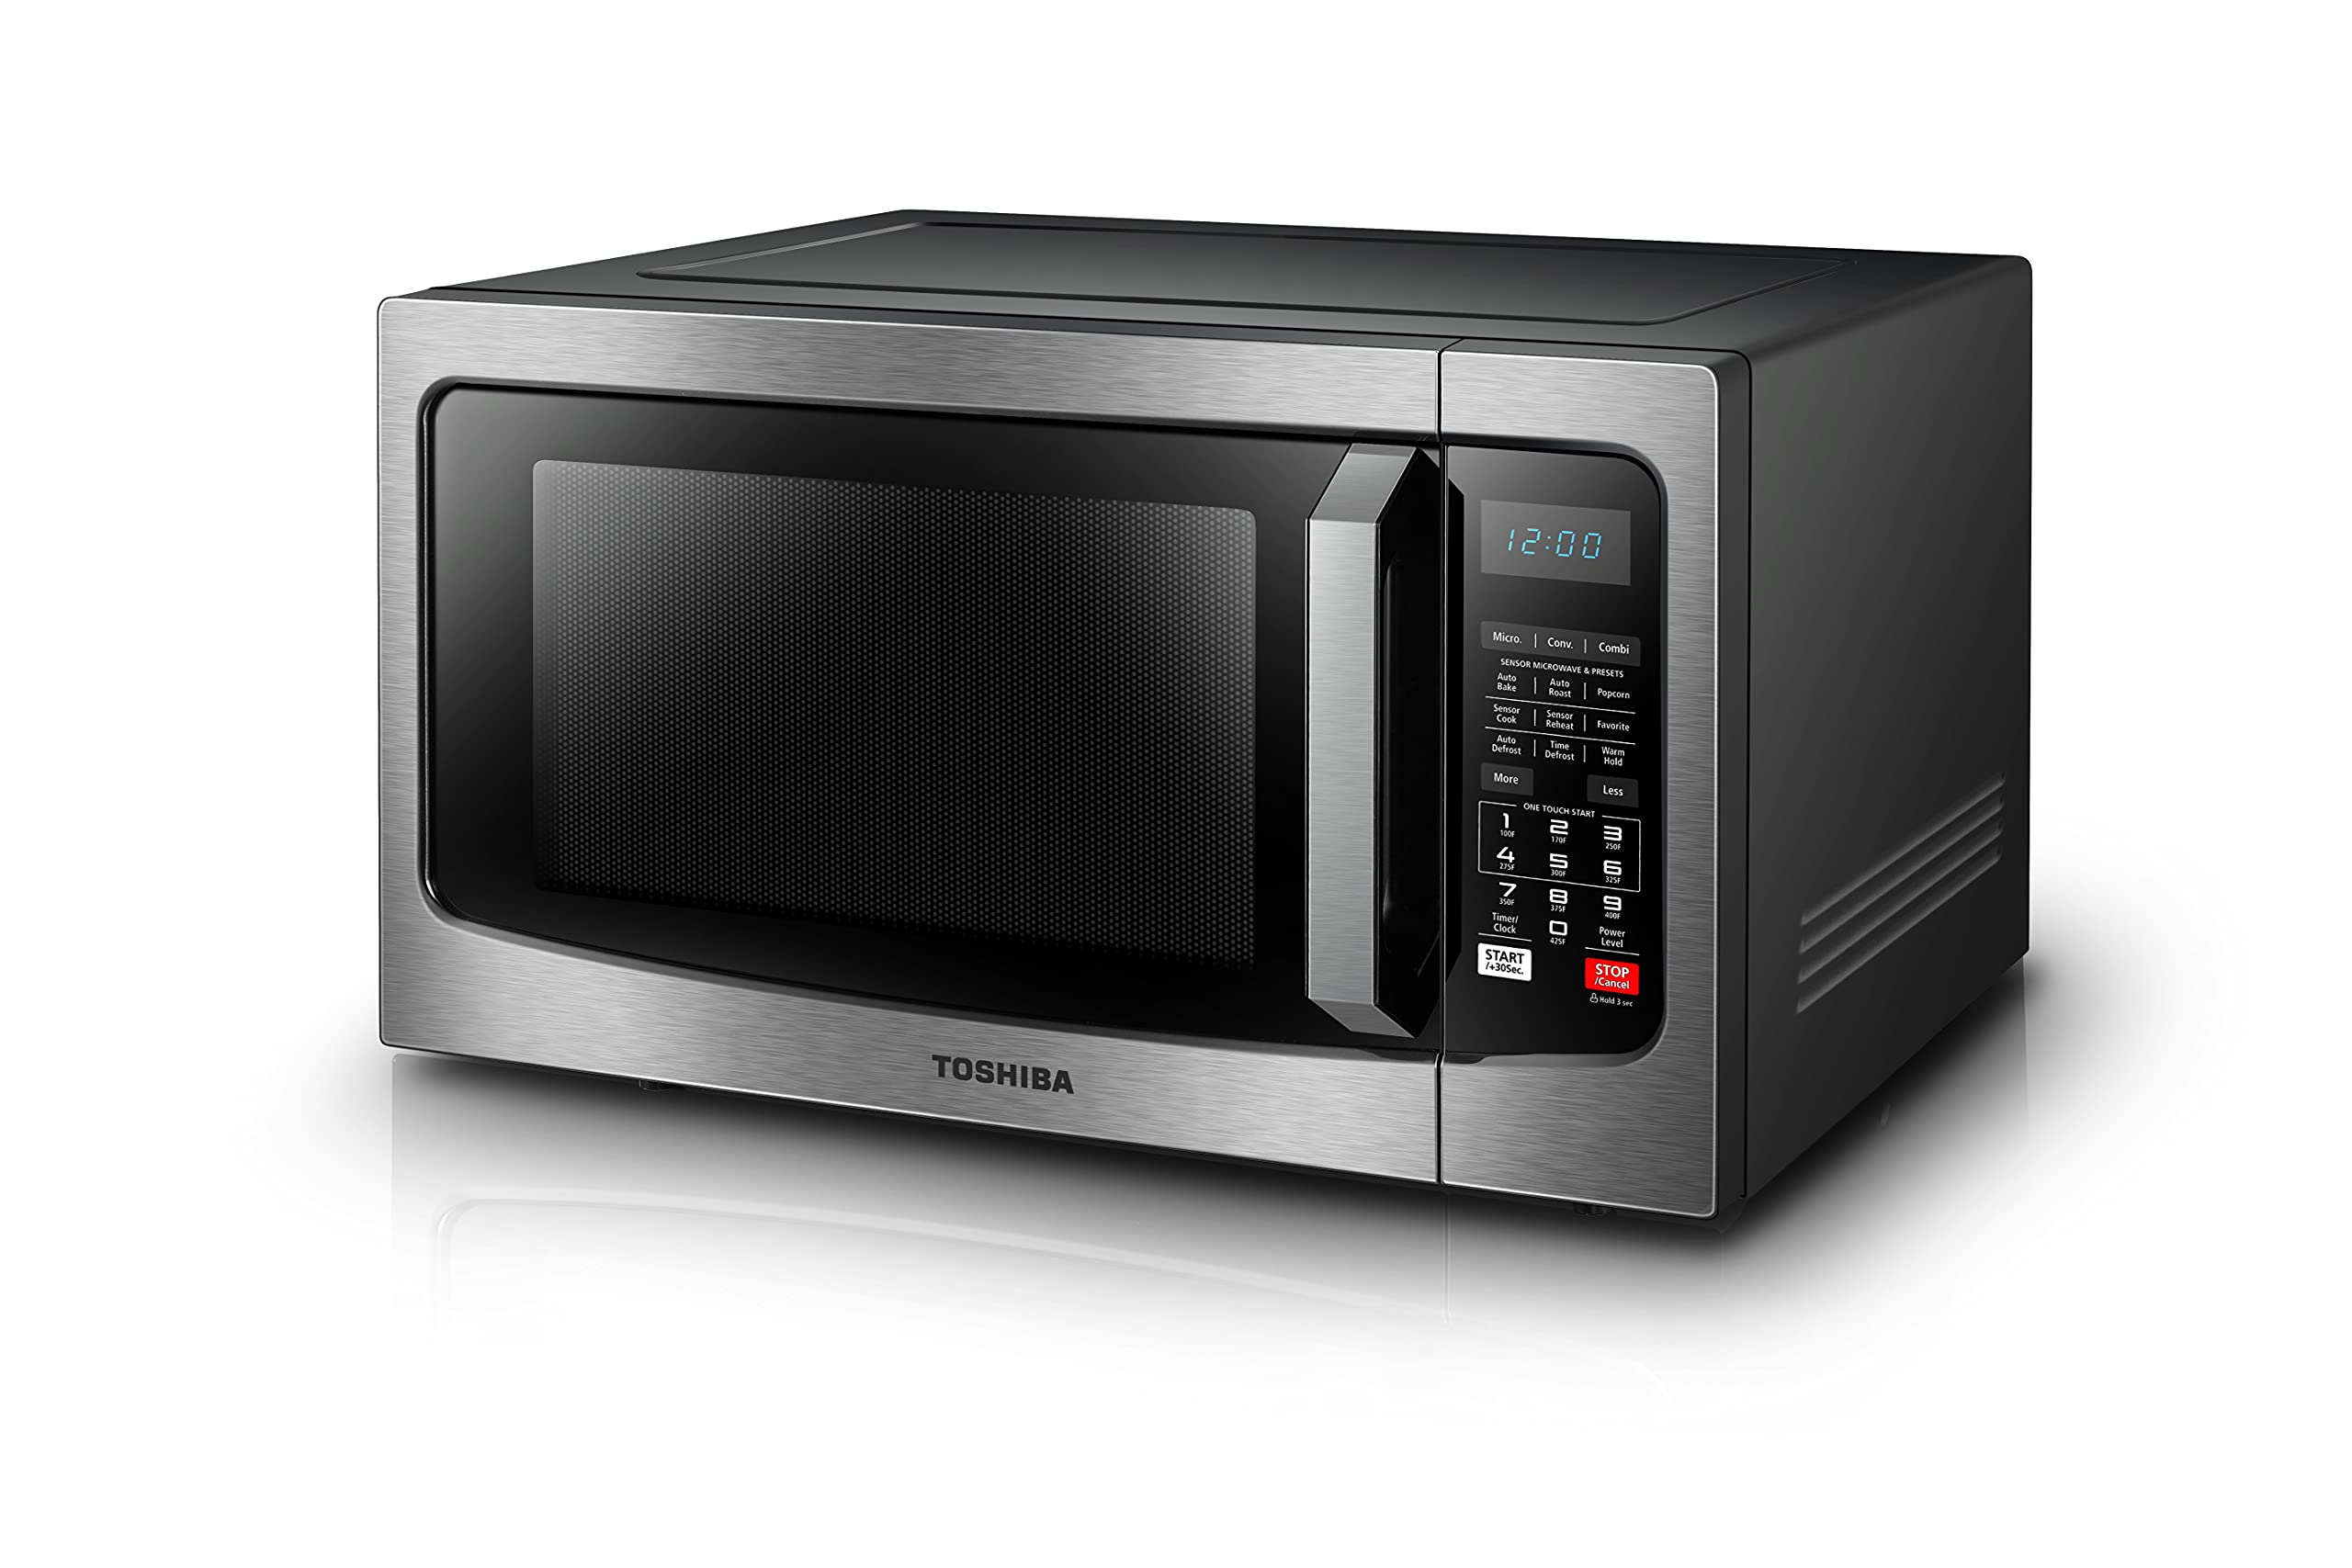 Toshiba EC042A5C-SS Microwave Oven with Convection Function, Smart Sensor, Easy-to-clean Stainless Steel Interior and ECO Mode, 1.5 Cu Ft